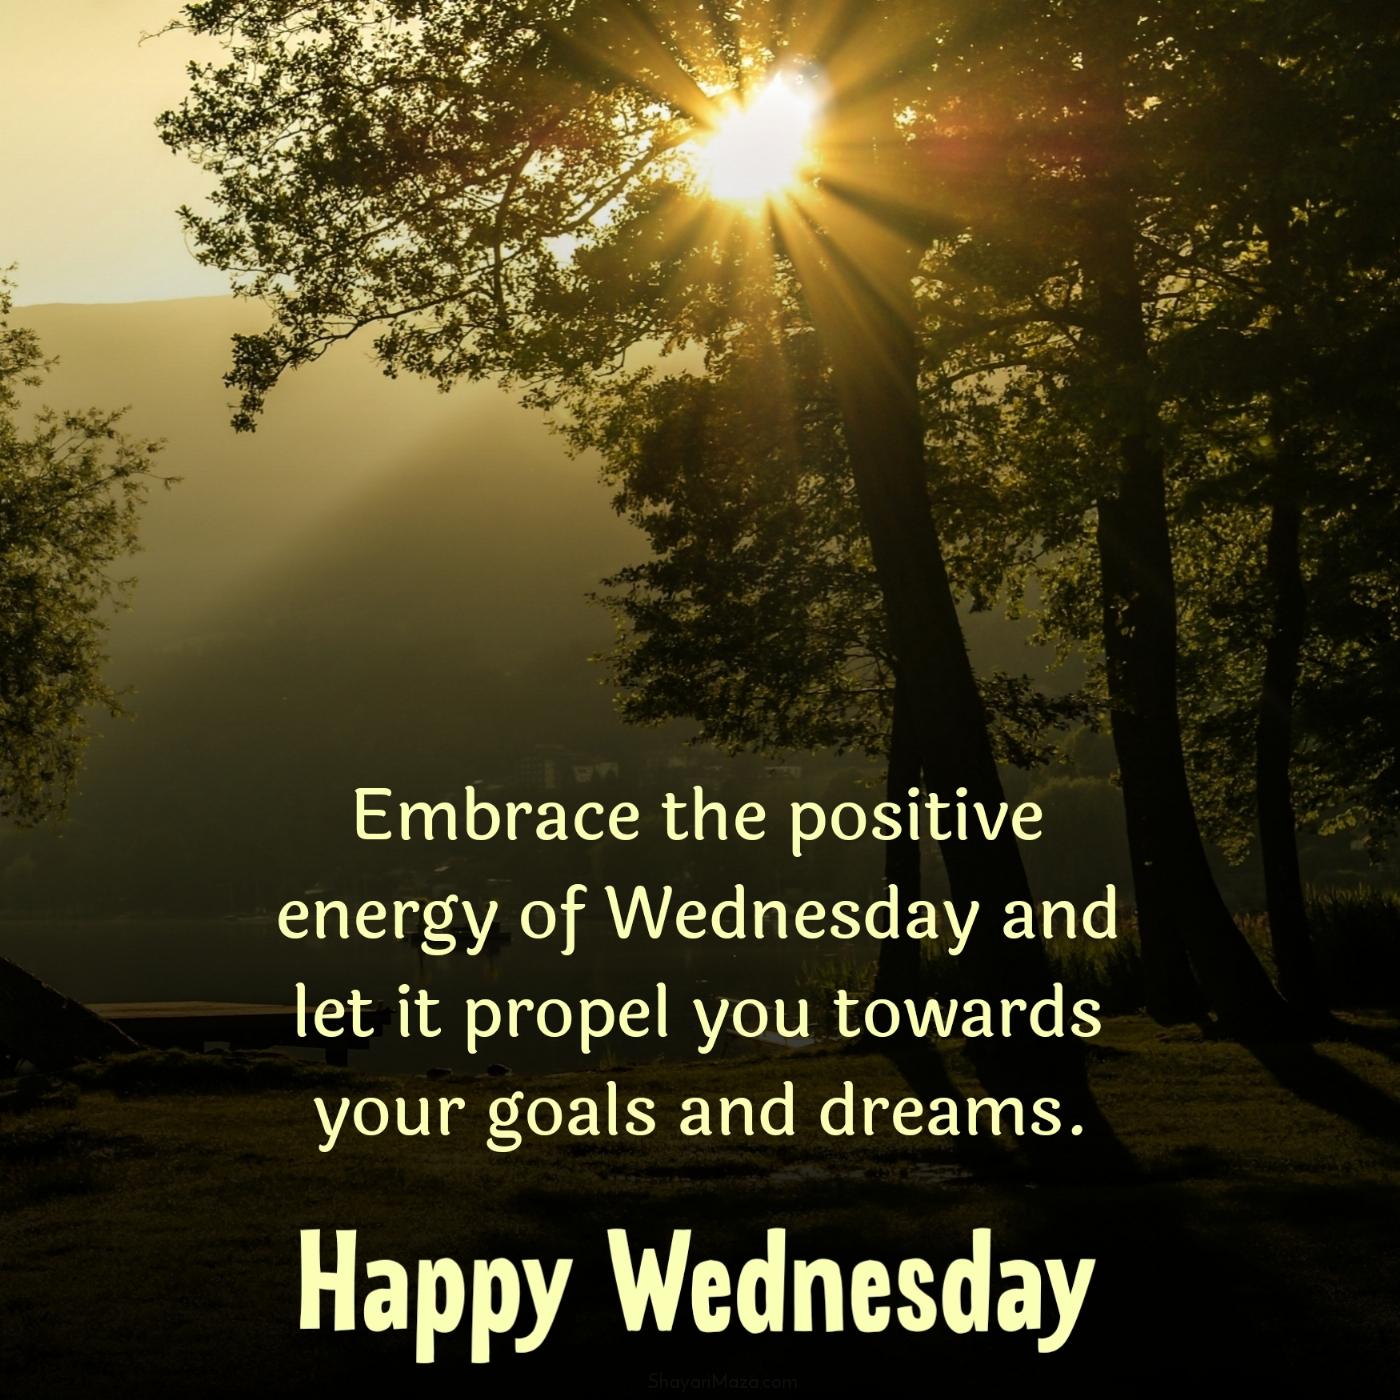 Embrace the positive energy of Wednesday and let it propel you